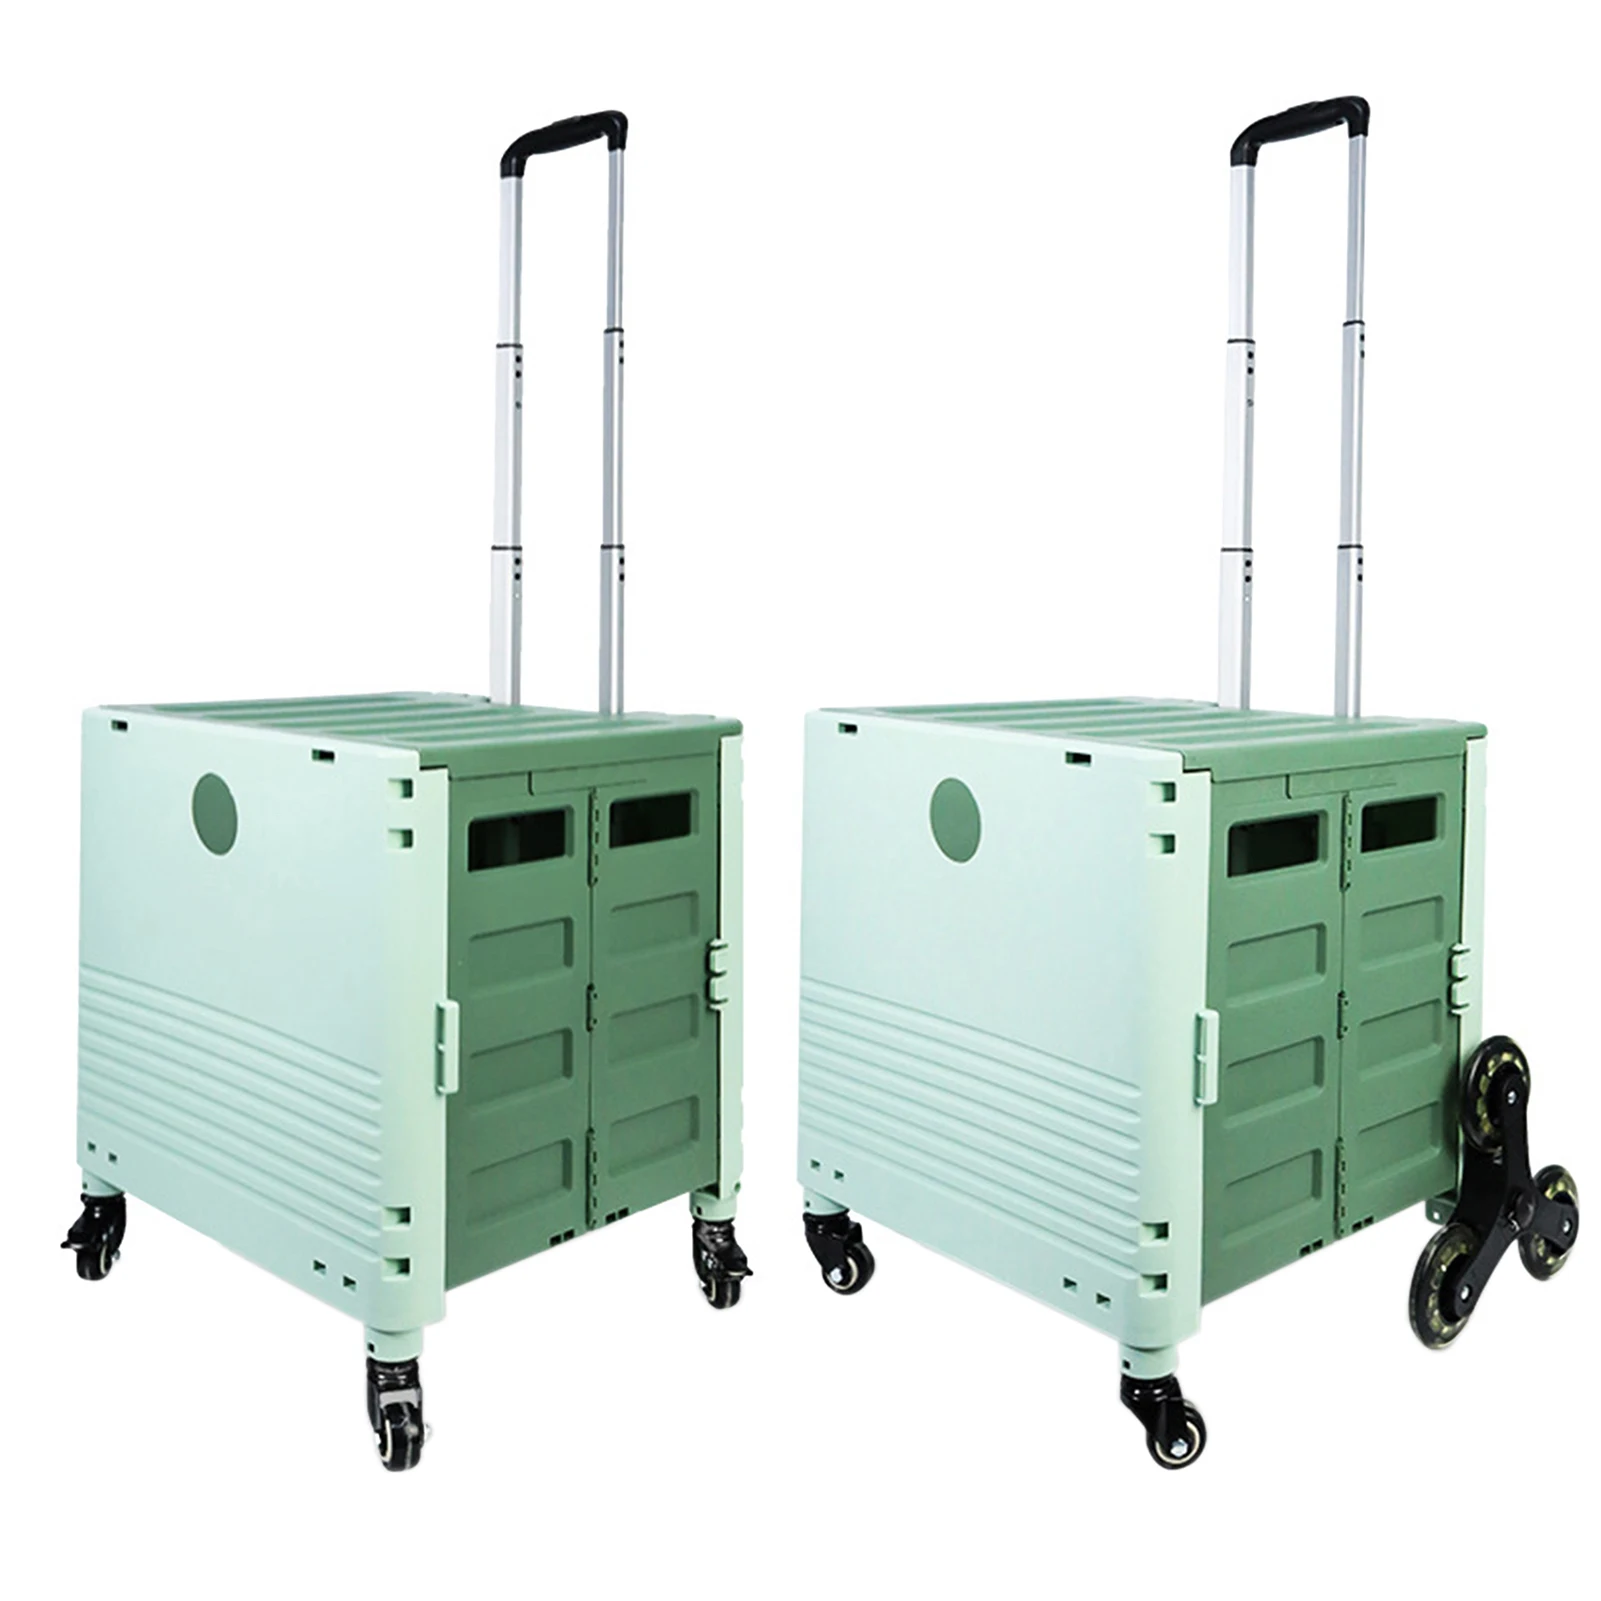 

Rolling Carts With Wheels Collapsible Grocery Cart On Wheels Rolling Utility Cart With Telescoping Handle Green